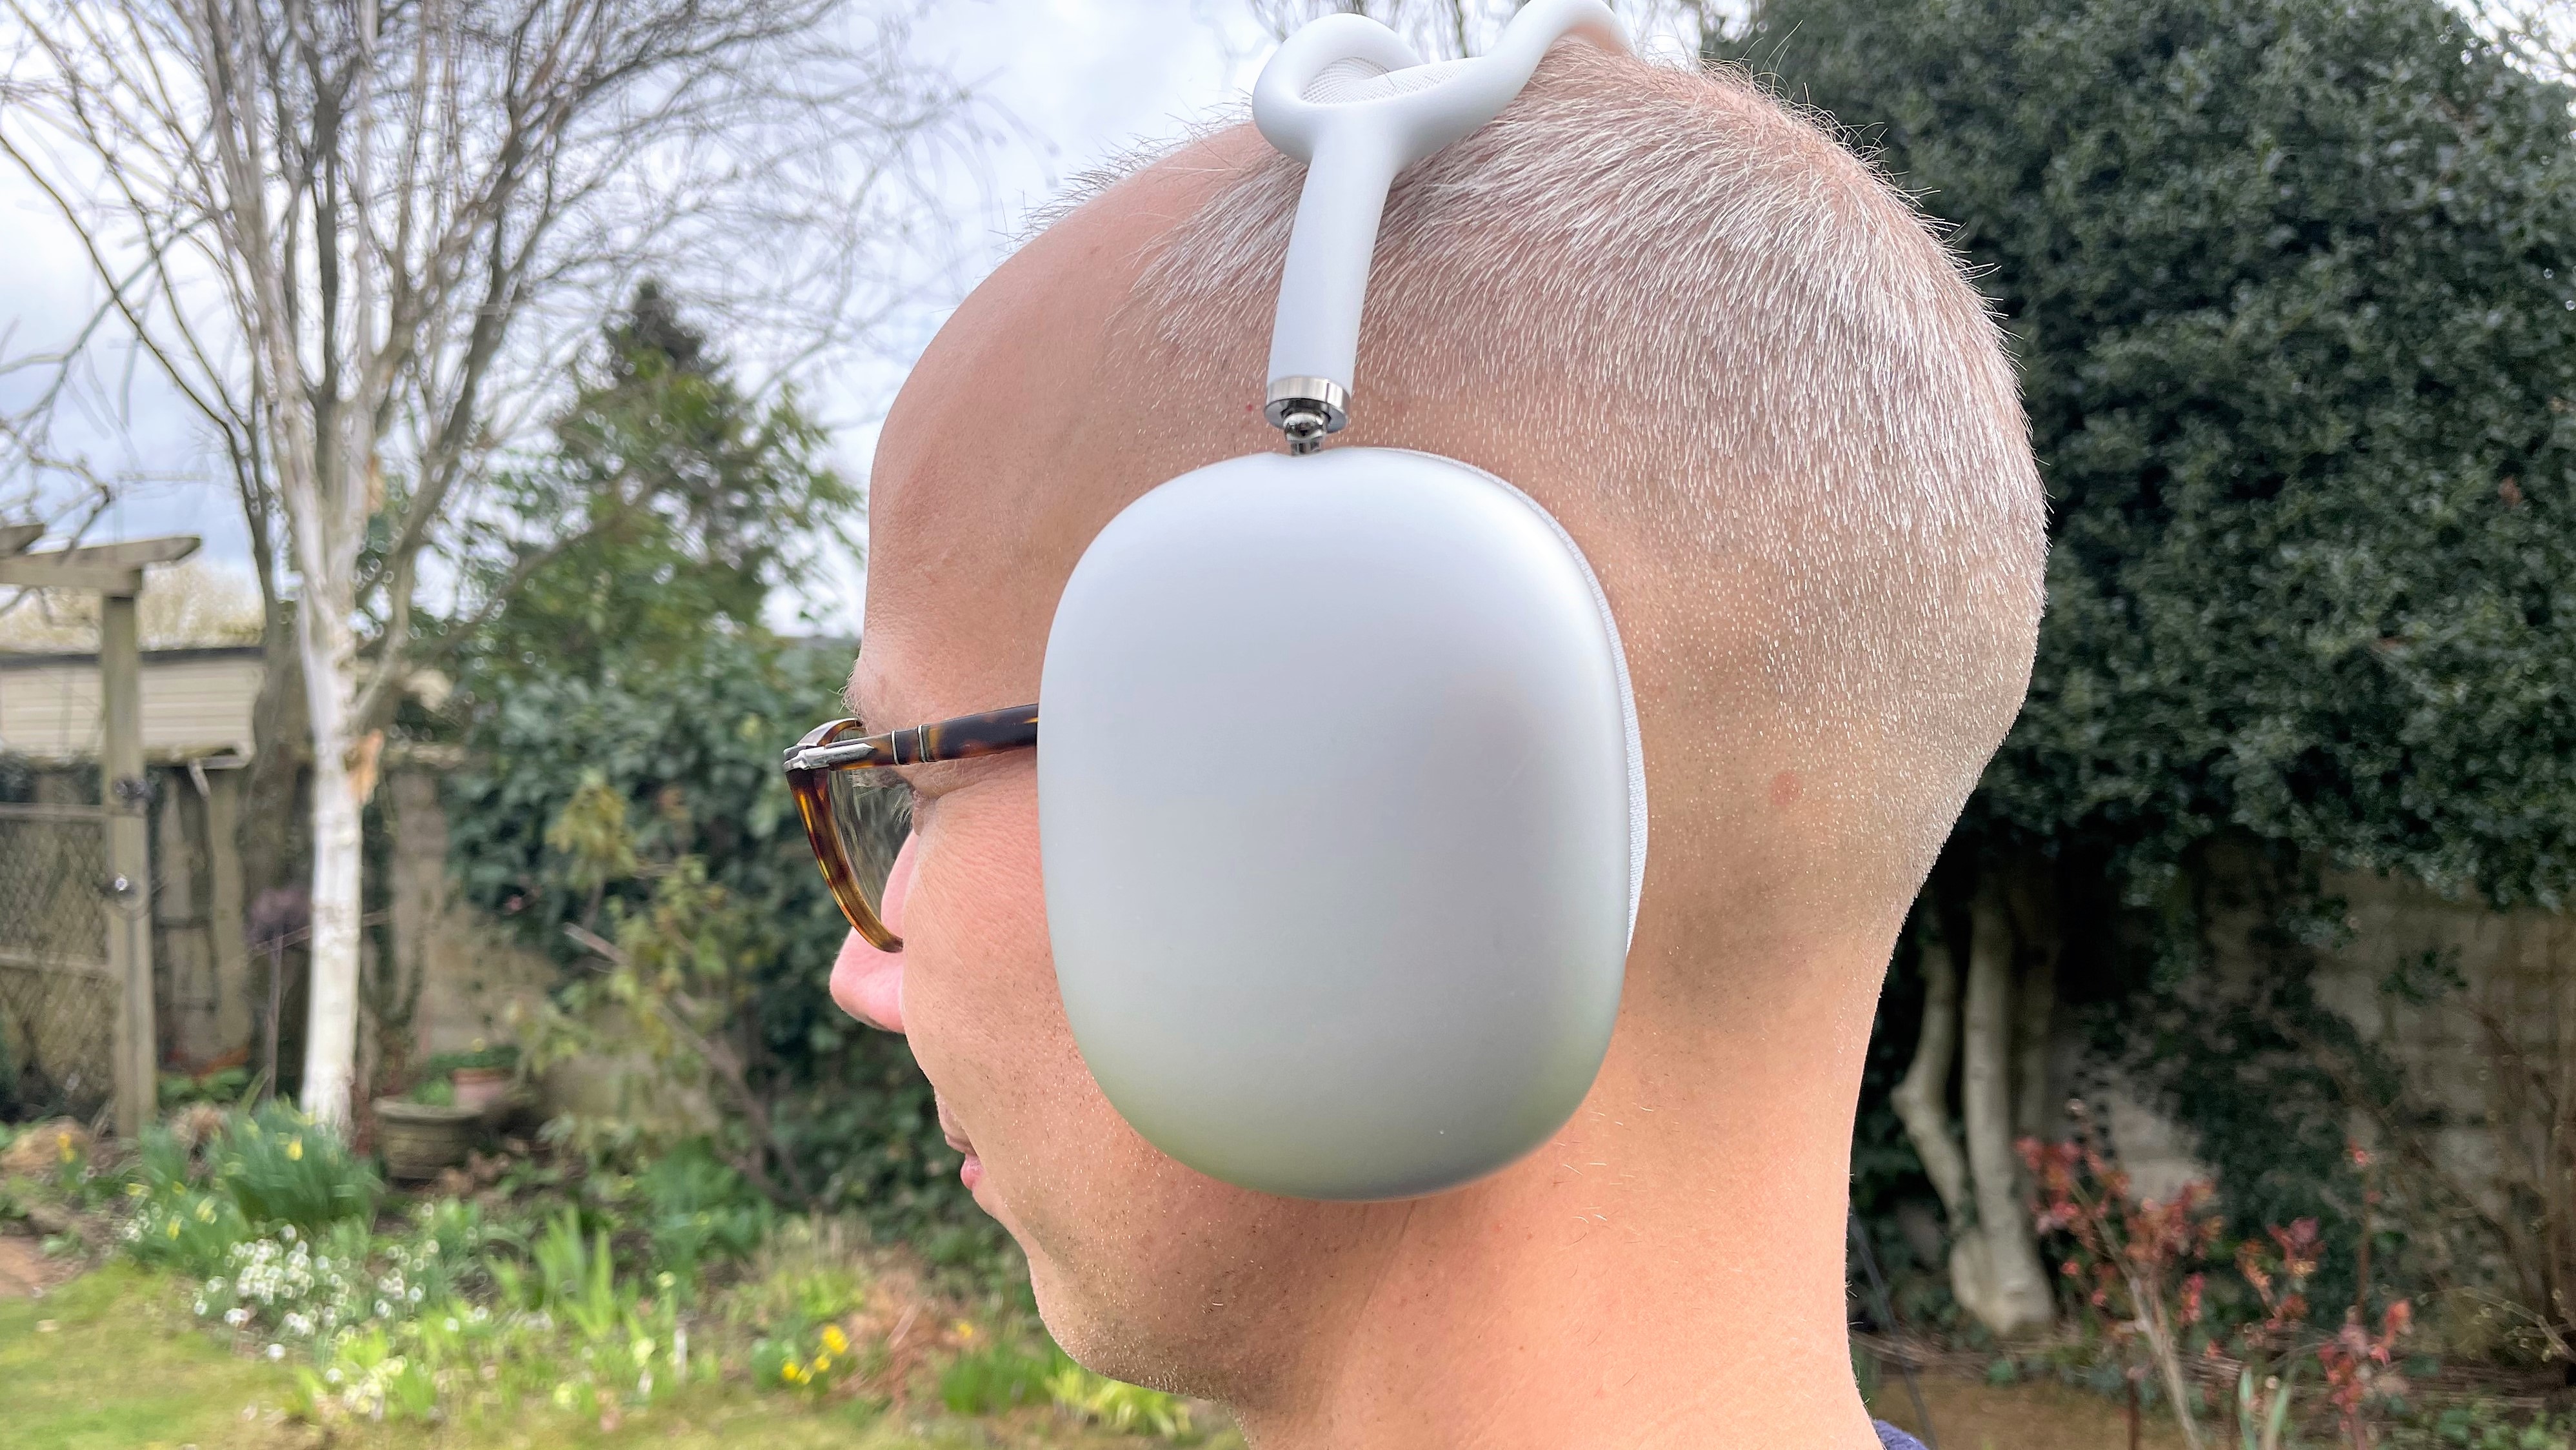 Apple AirPods Max worn by reviewer in garden